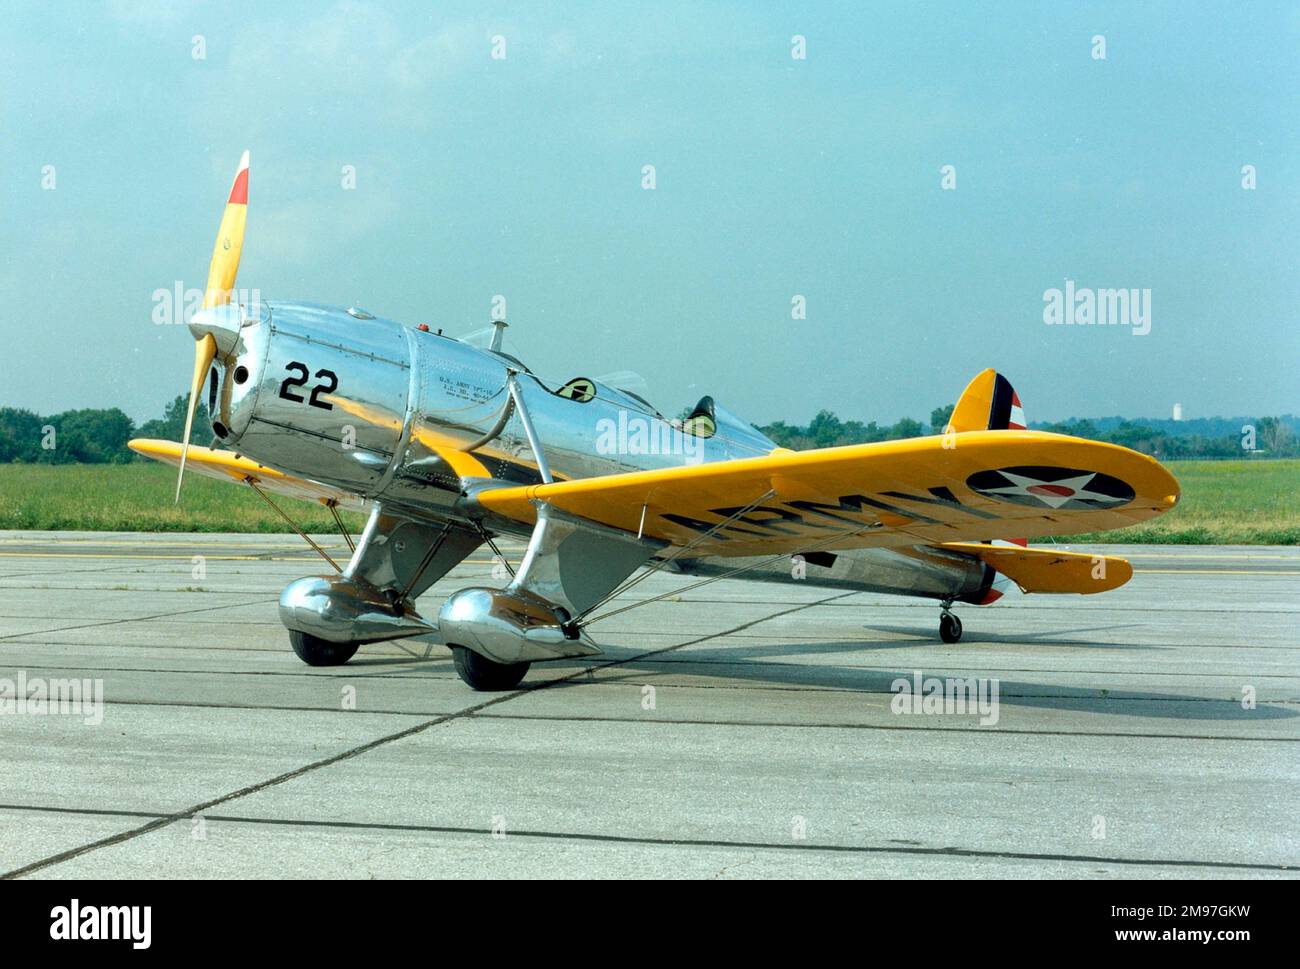 Ryan YPT-16 -based on their earlier STM sport plane, Ryan built thousands of these pilot trainers, as well as operating training schools. Stock Photo